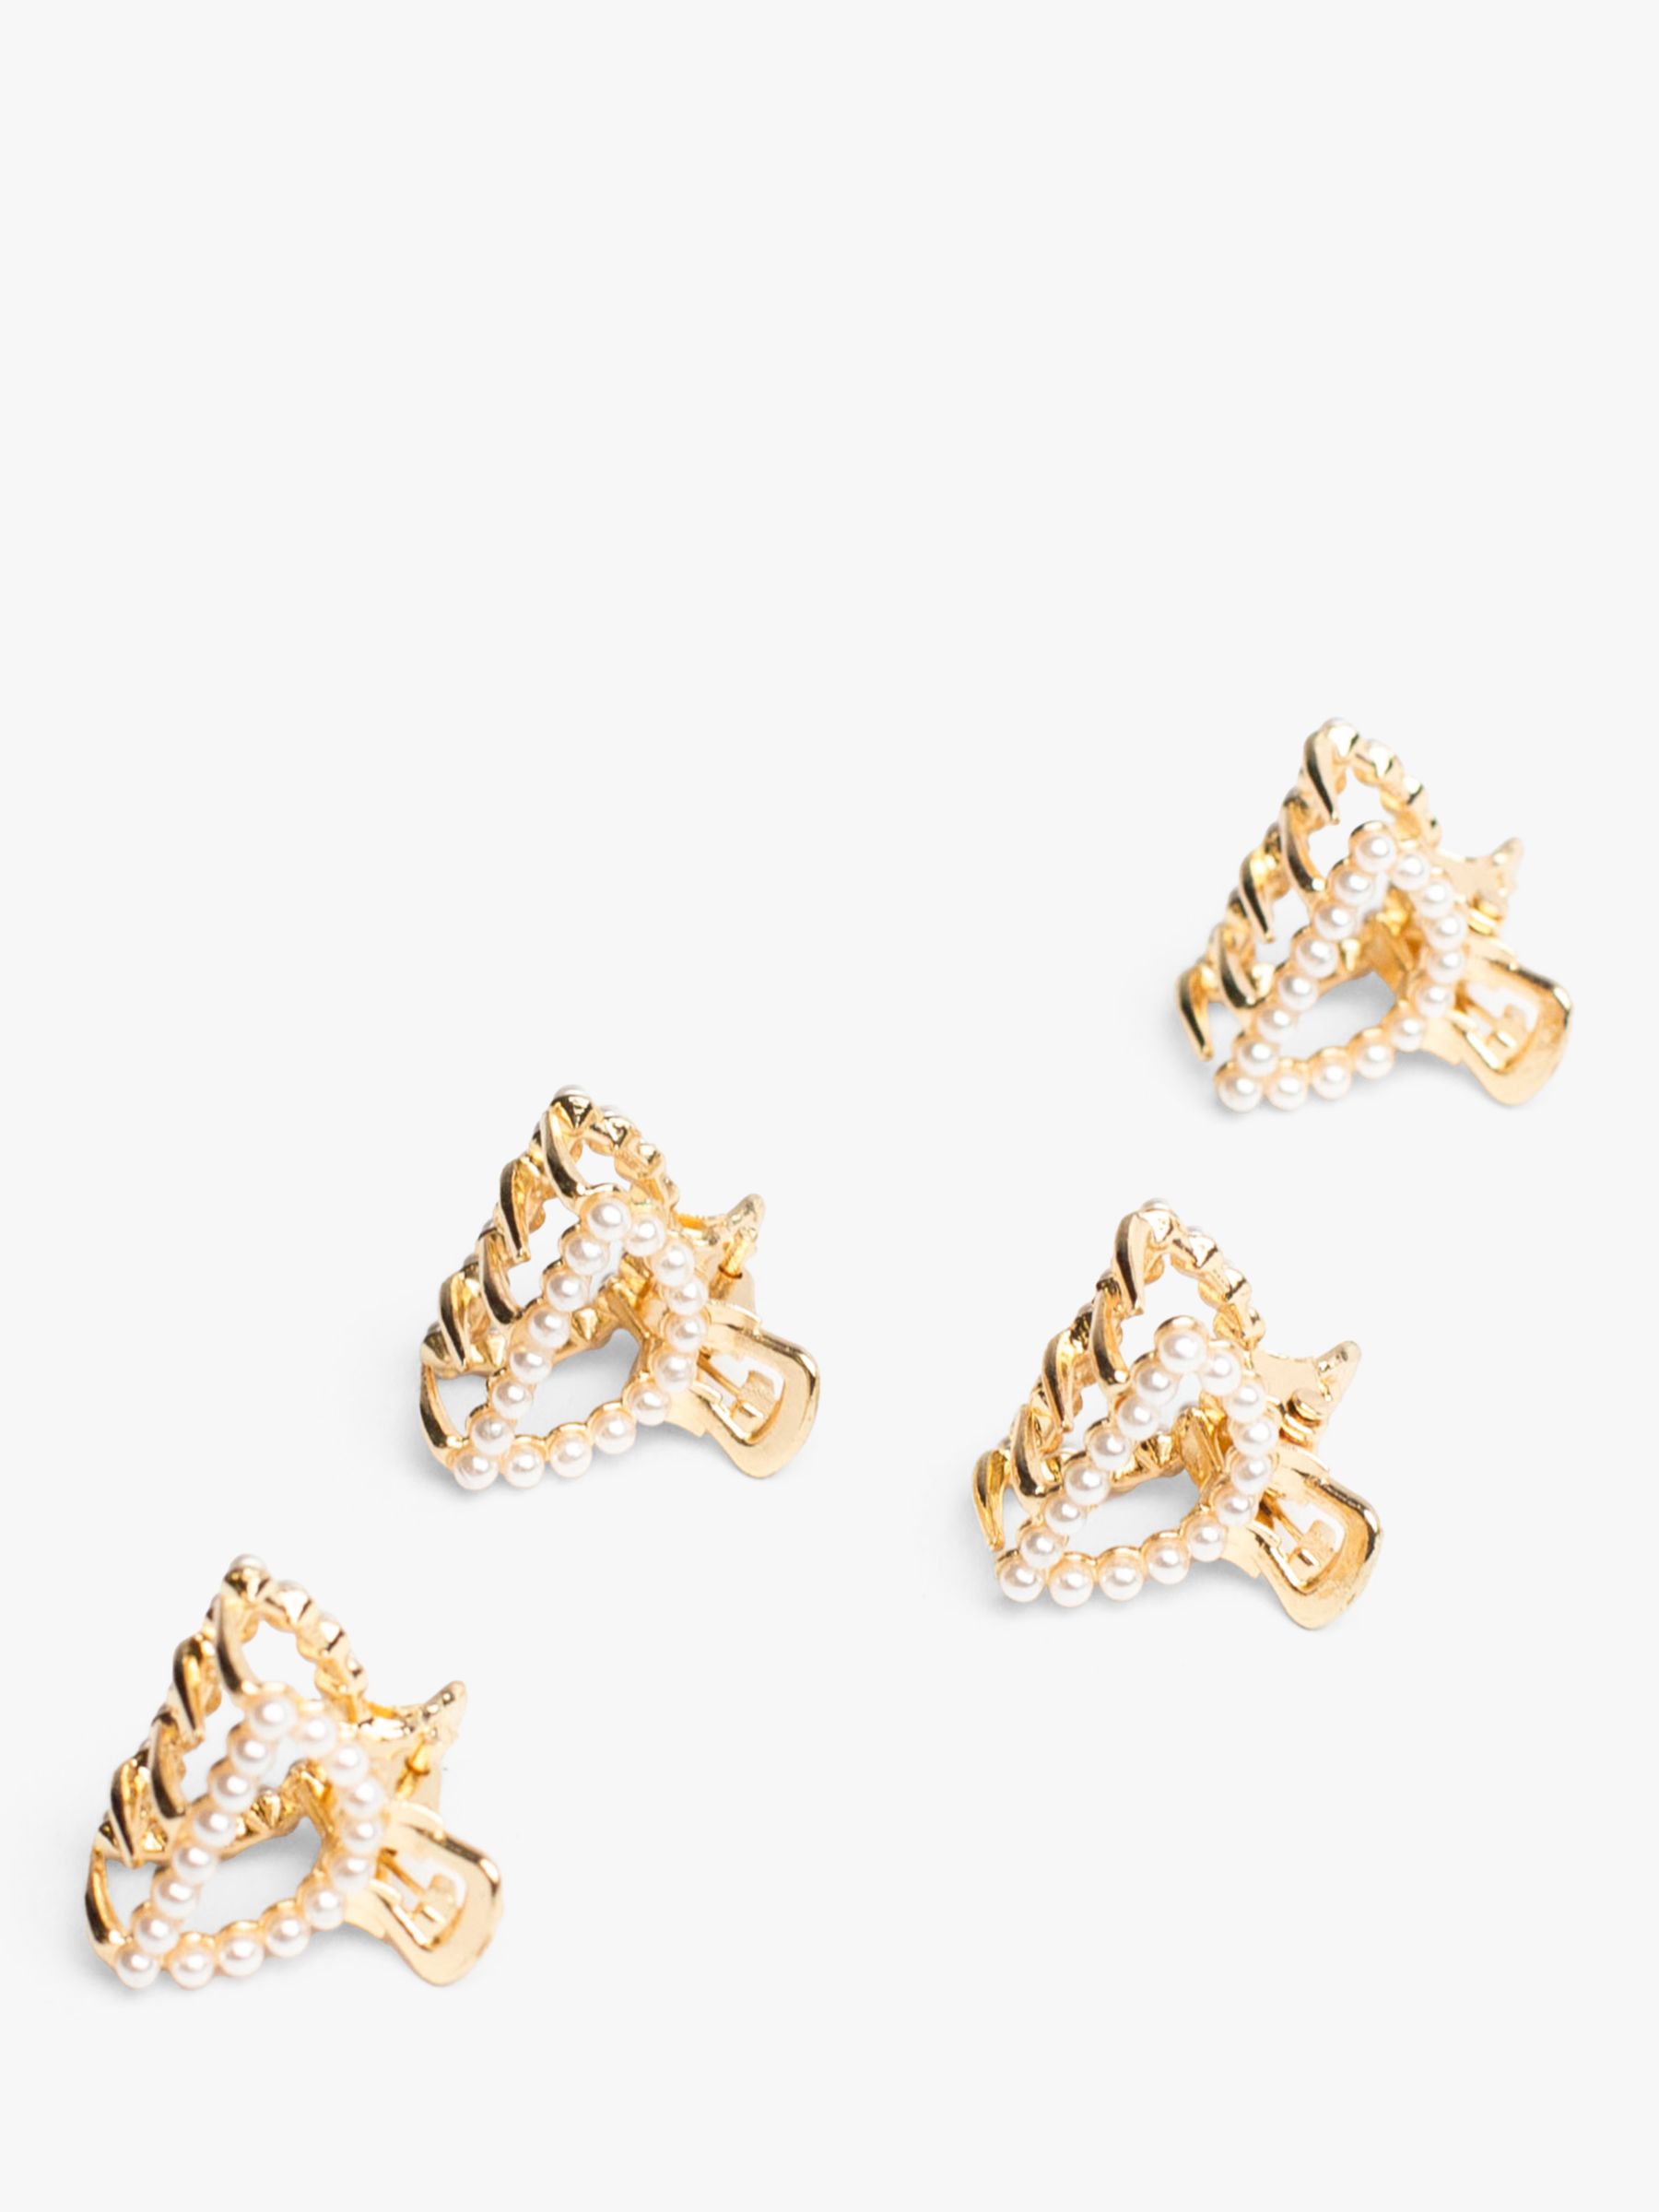 Bloom & Bay Petunia Mini Pearl Hair Claw Set, Pack of 4, Gold/Cream, One Size